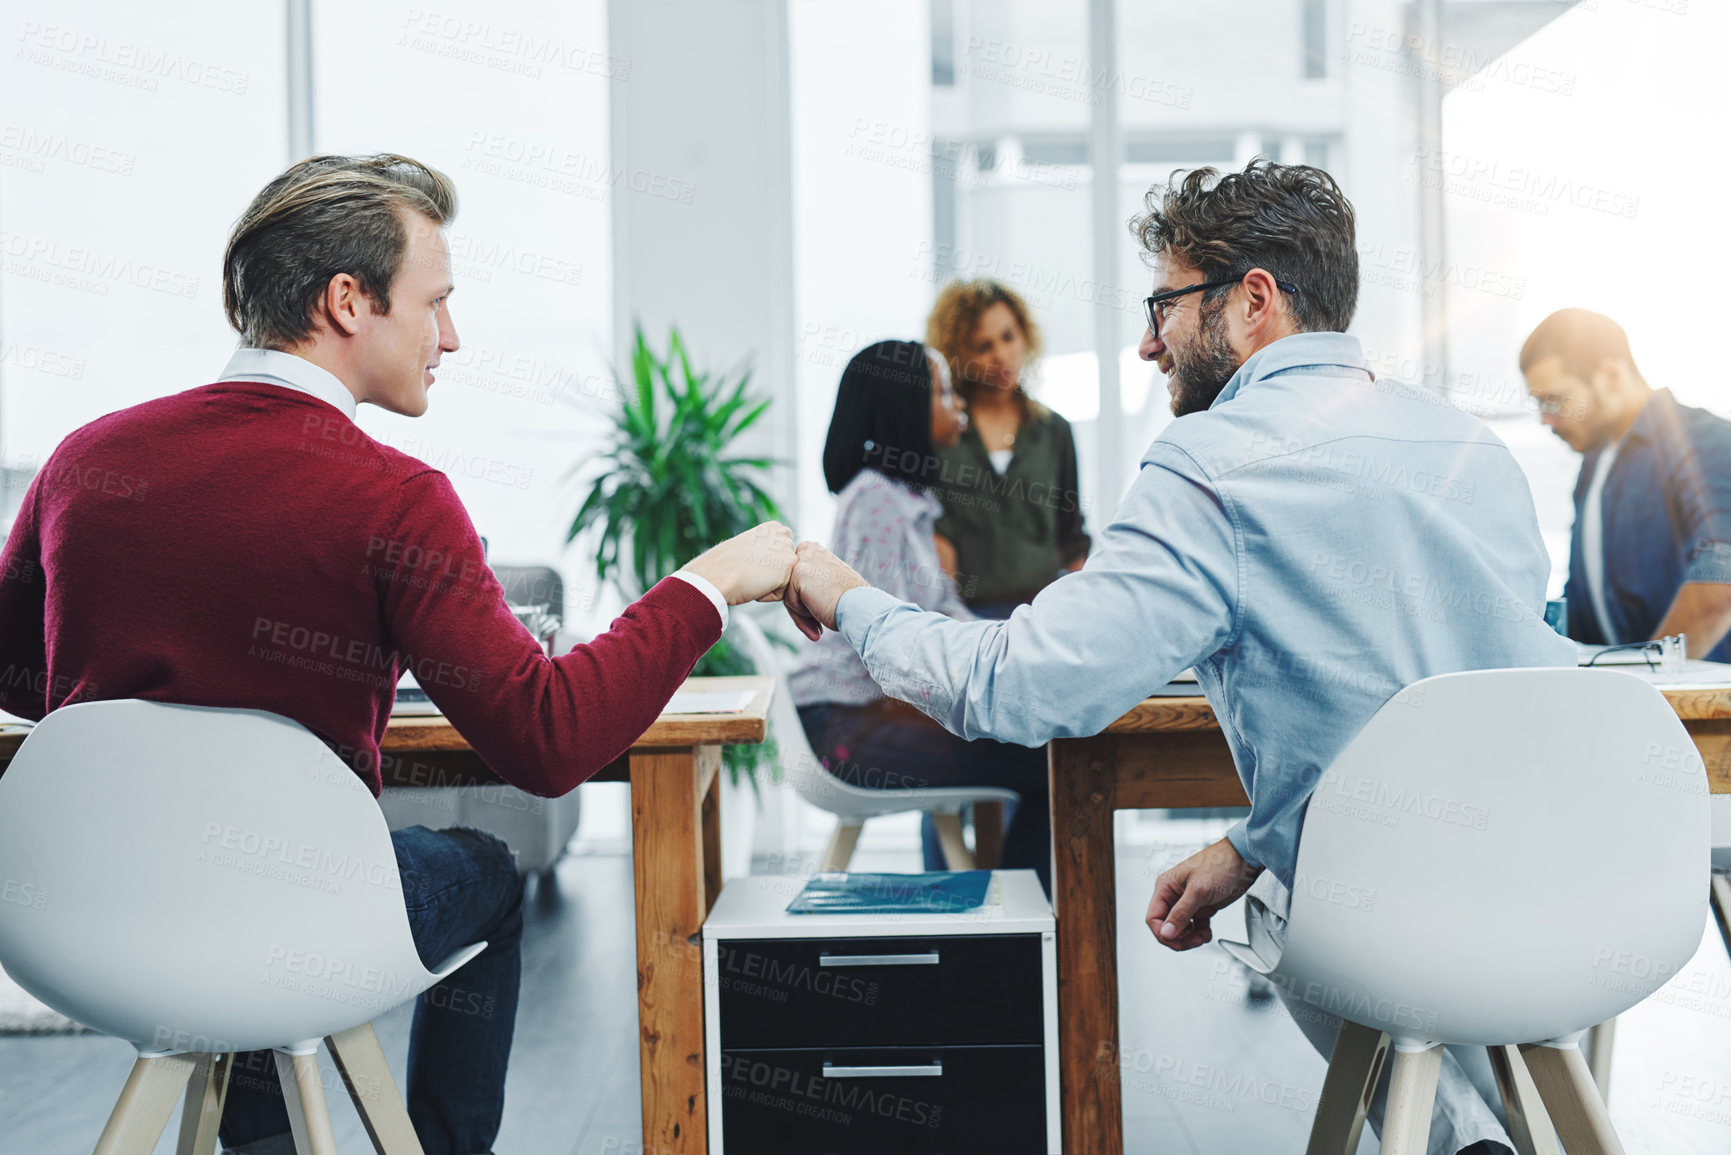 Buy stock photo Shot of two young colleagues giving each other a fist bump at their desks in a modern office